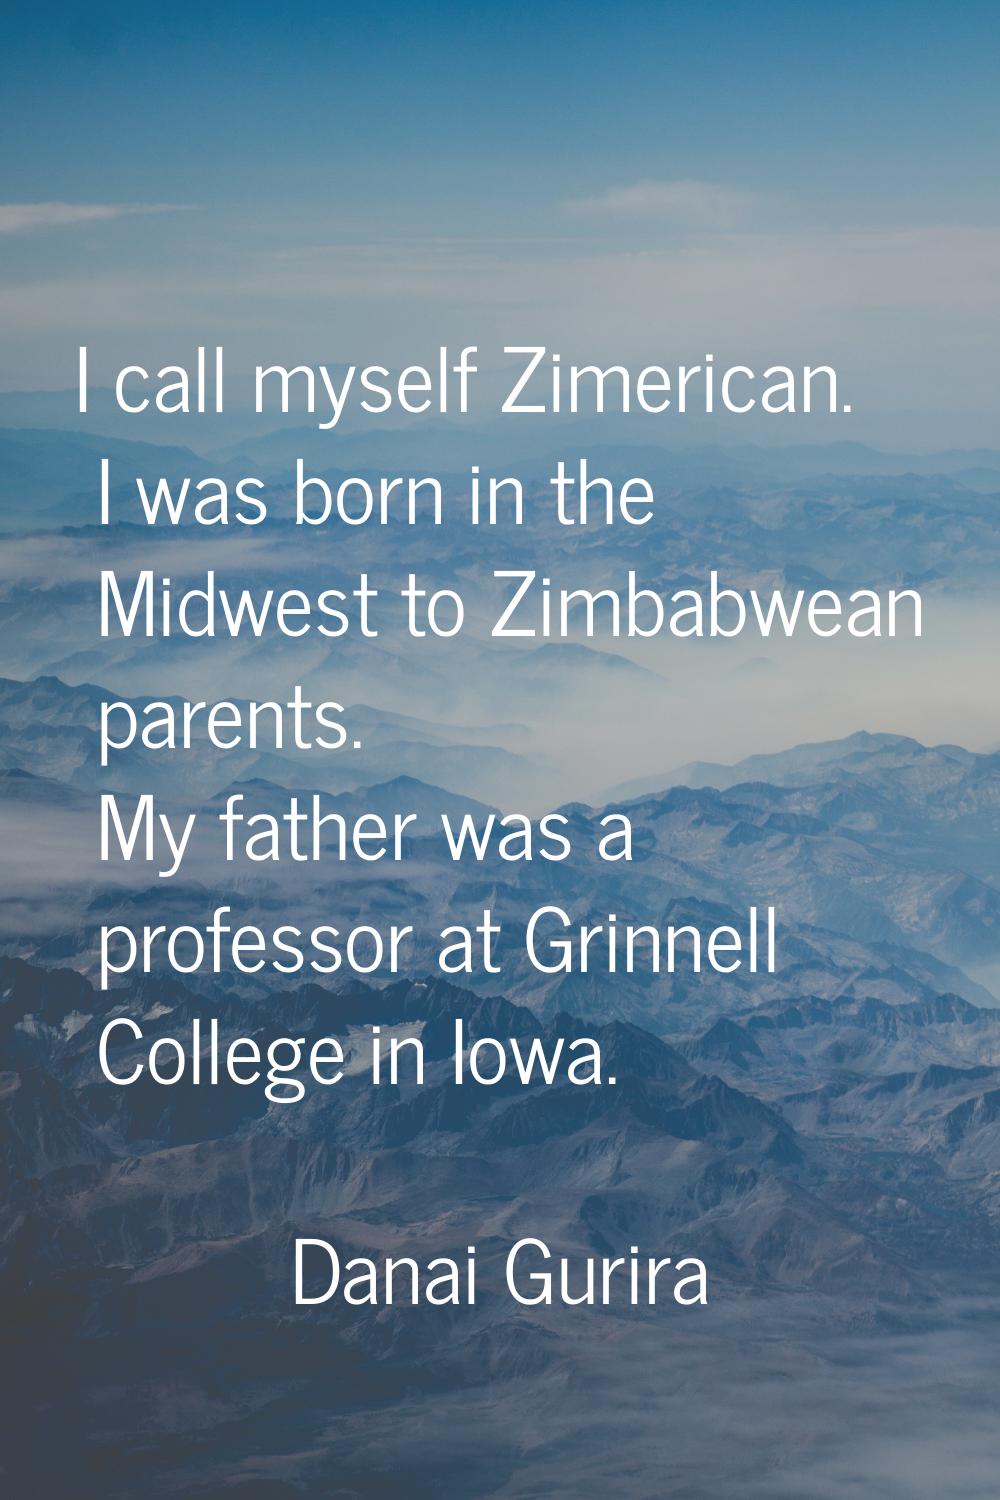 I call myself Zimerican. I was born in the Midwest to Zimbabwean parents. My father was a professor